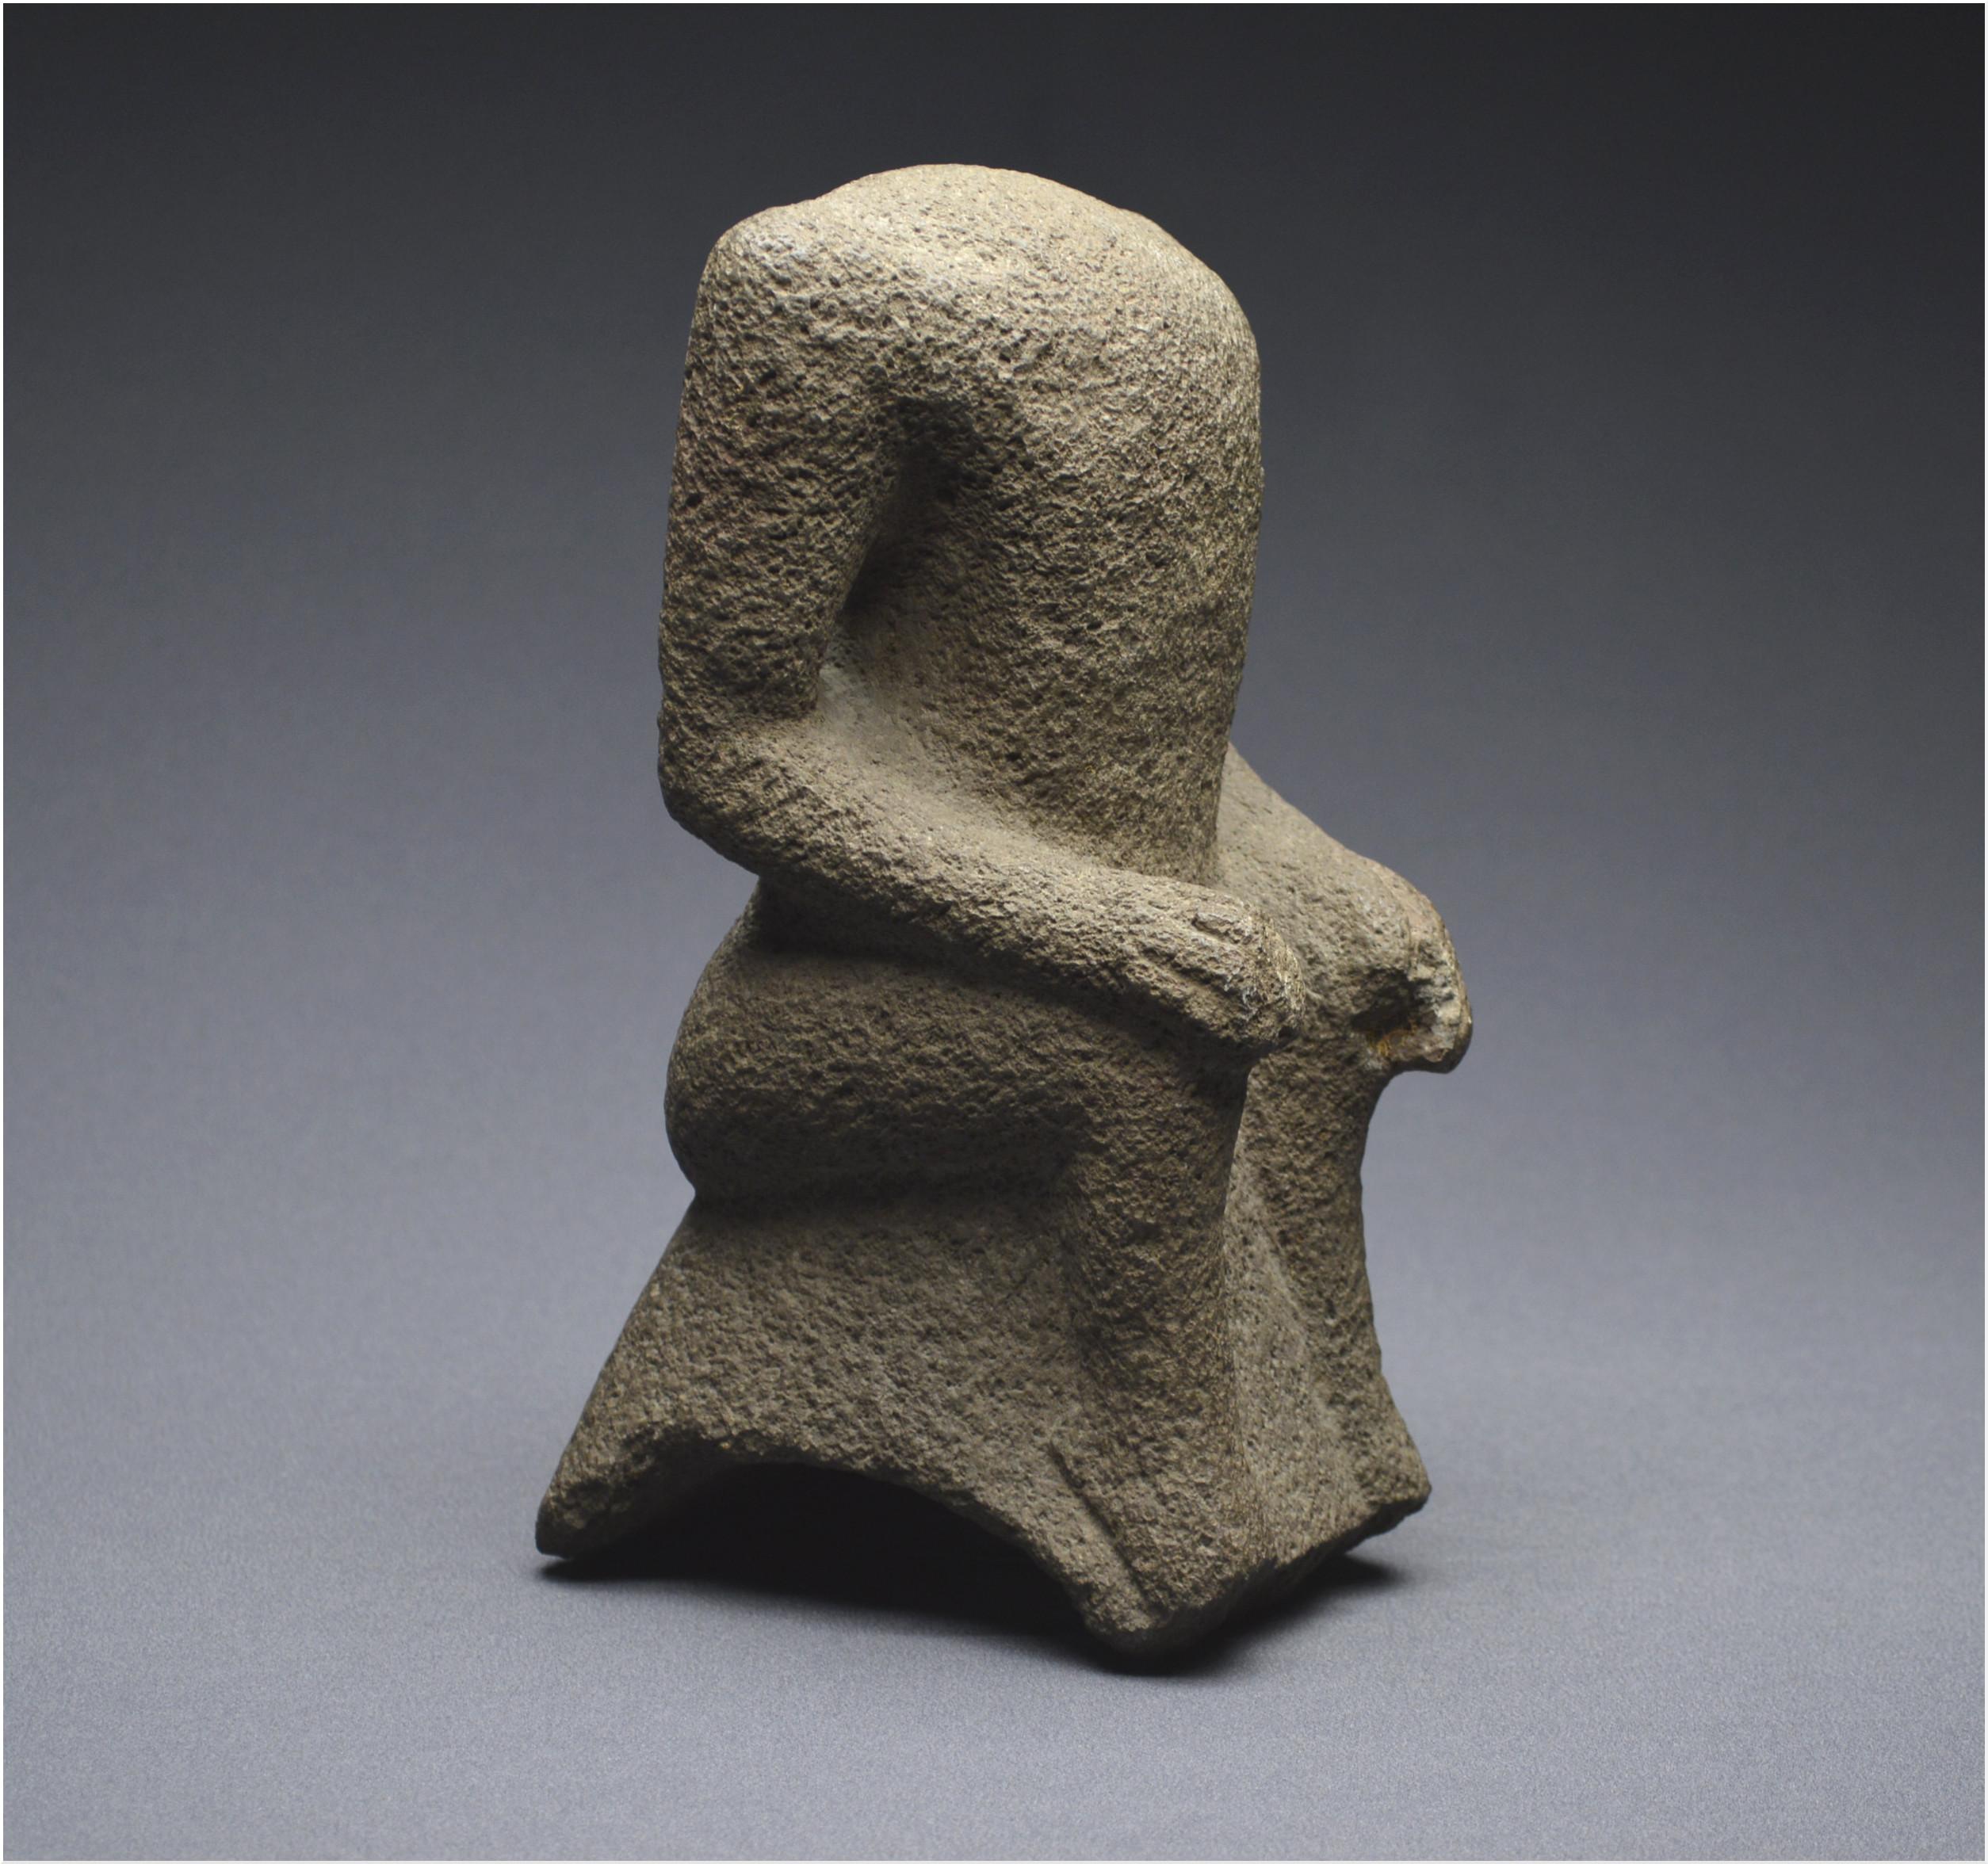 Palma representing a seated figure


Gulf Coast of Mexico
Veracruz Culture
Early Classic period: 450-550 AD


Interesting palma depicting an acephalous character represented naked, seated on a high concave base, arms detached from the body, hands